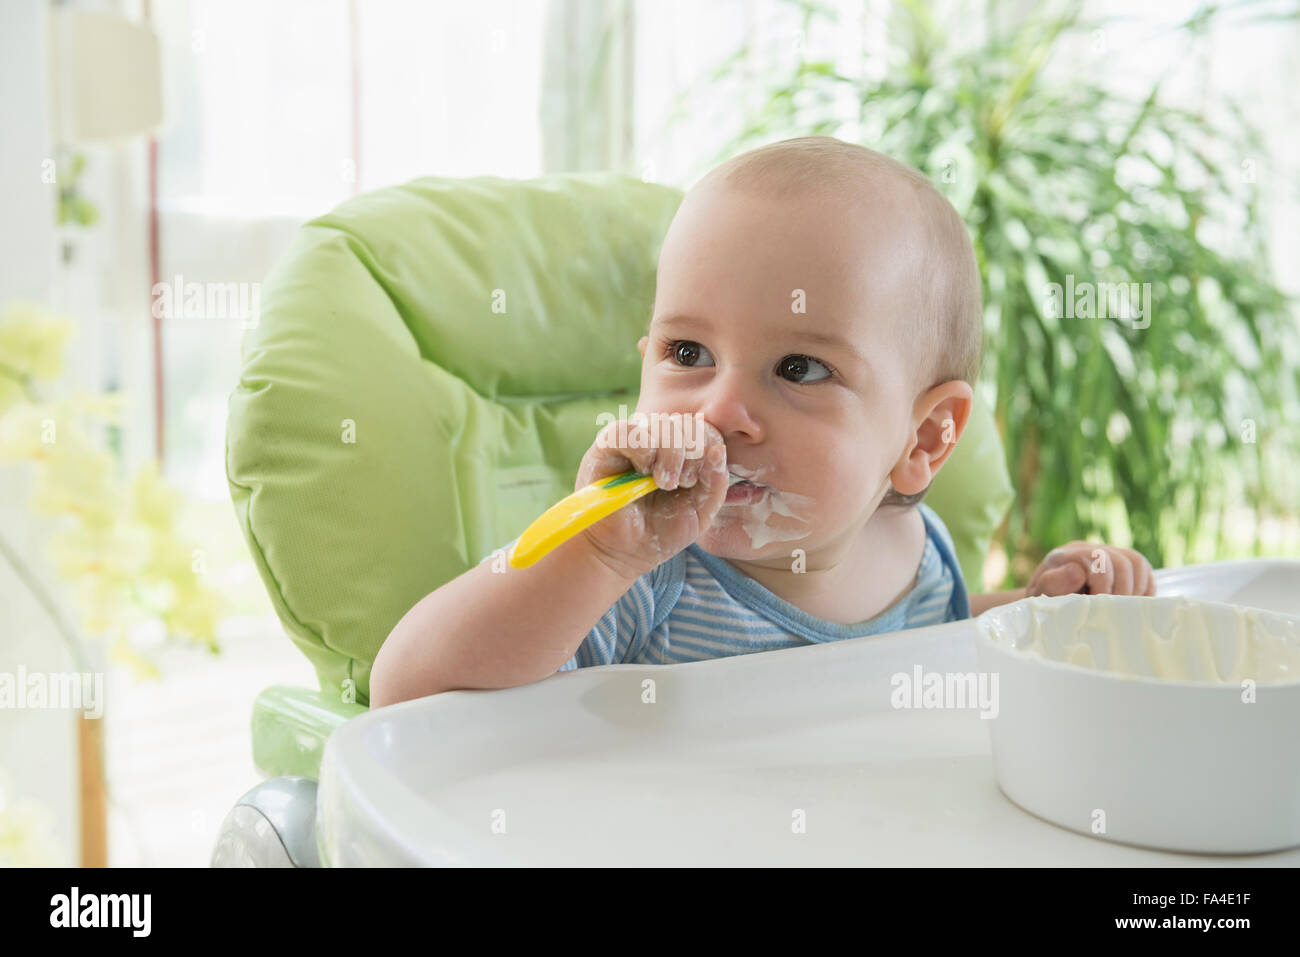 Cute little baby boy eating food on high chair, Munich, Bavaria, Germany Stock Photo